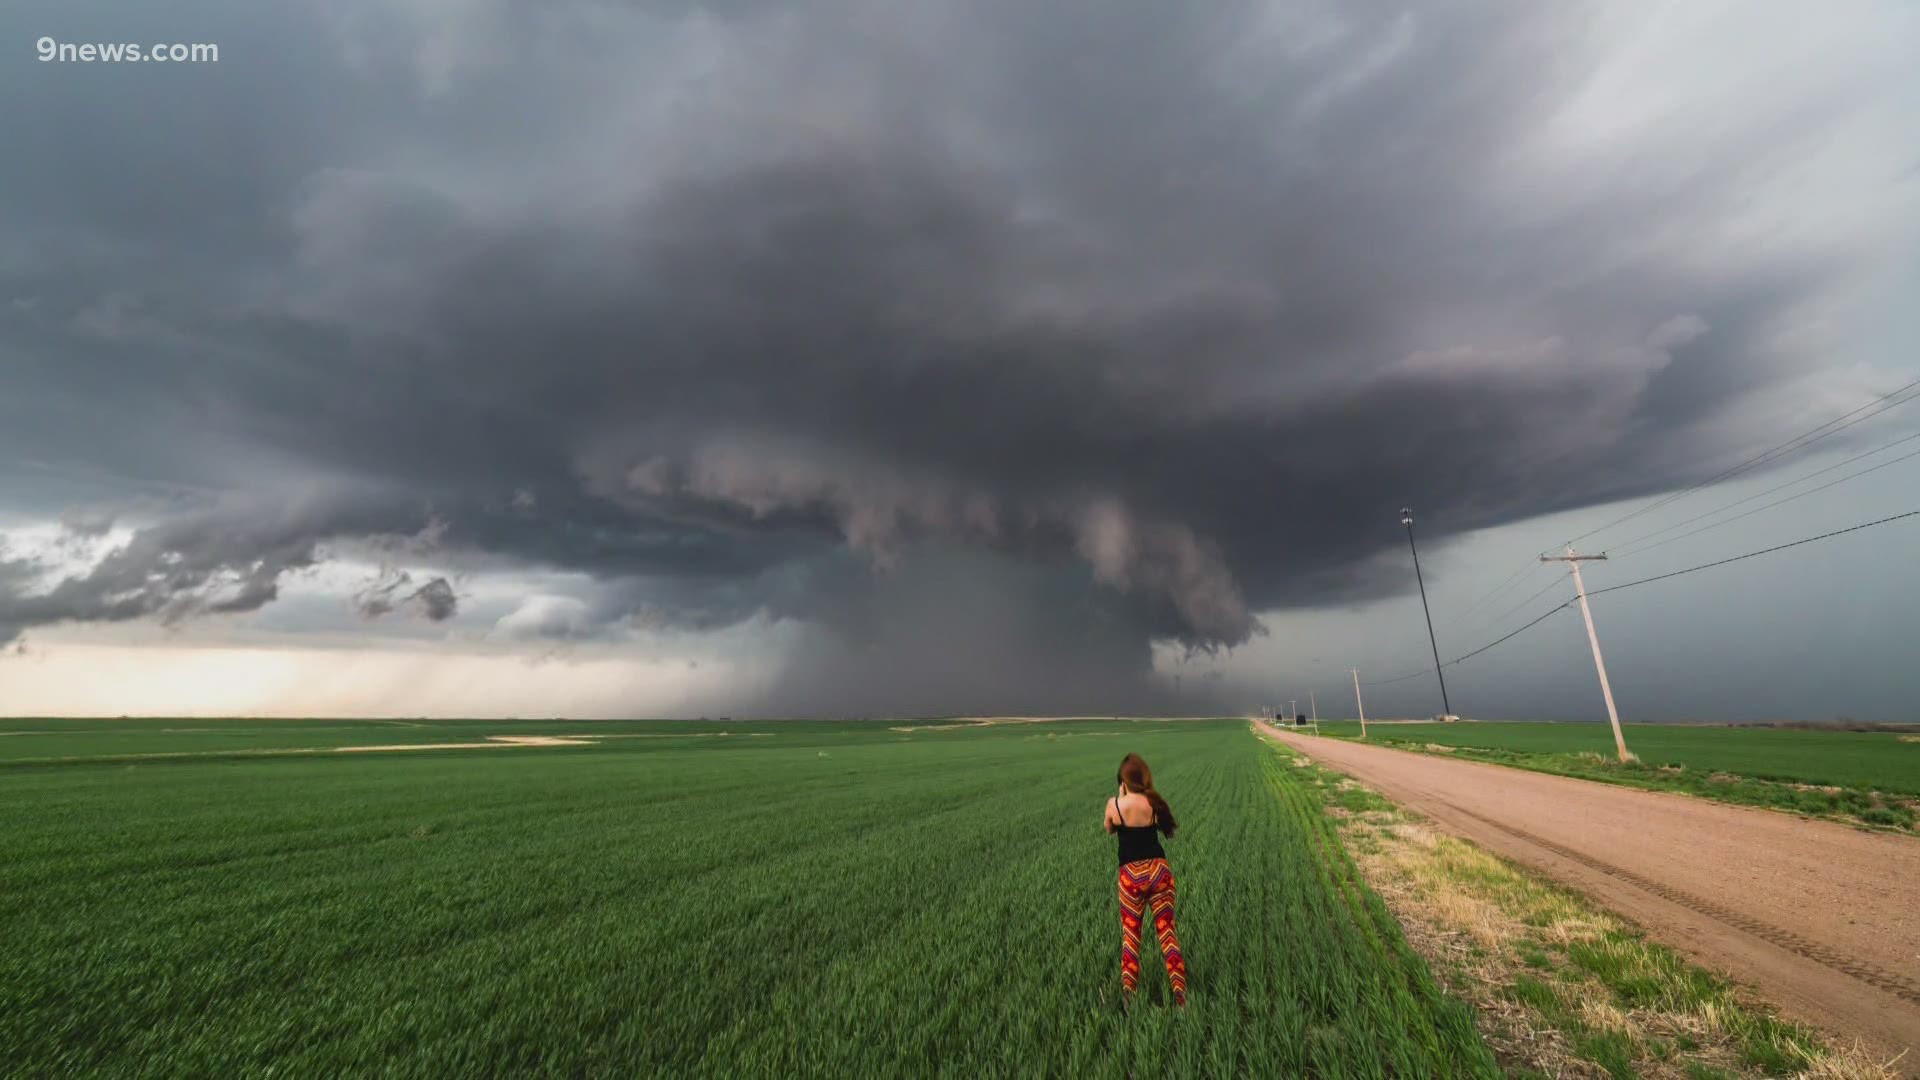 Our in-house storm chaser Cory Reppenhagen takes a look at the rising trend in the field.